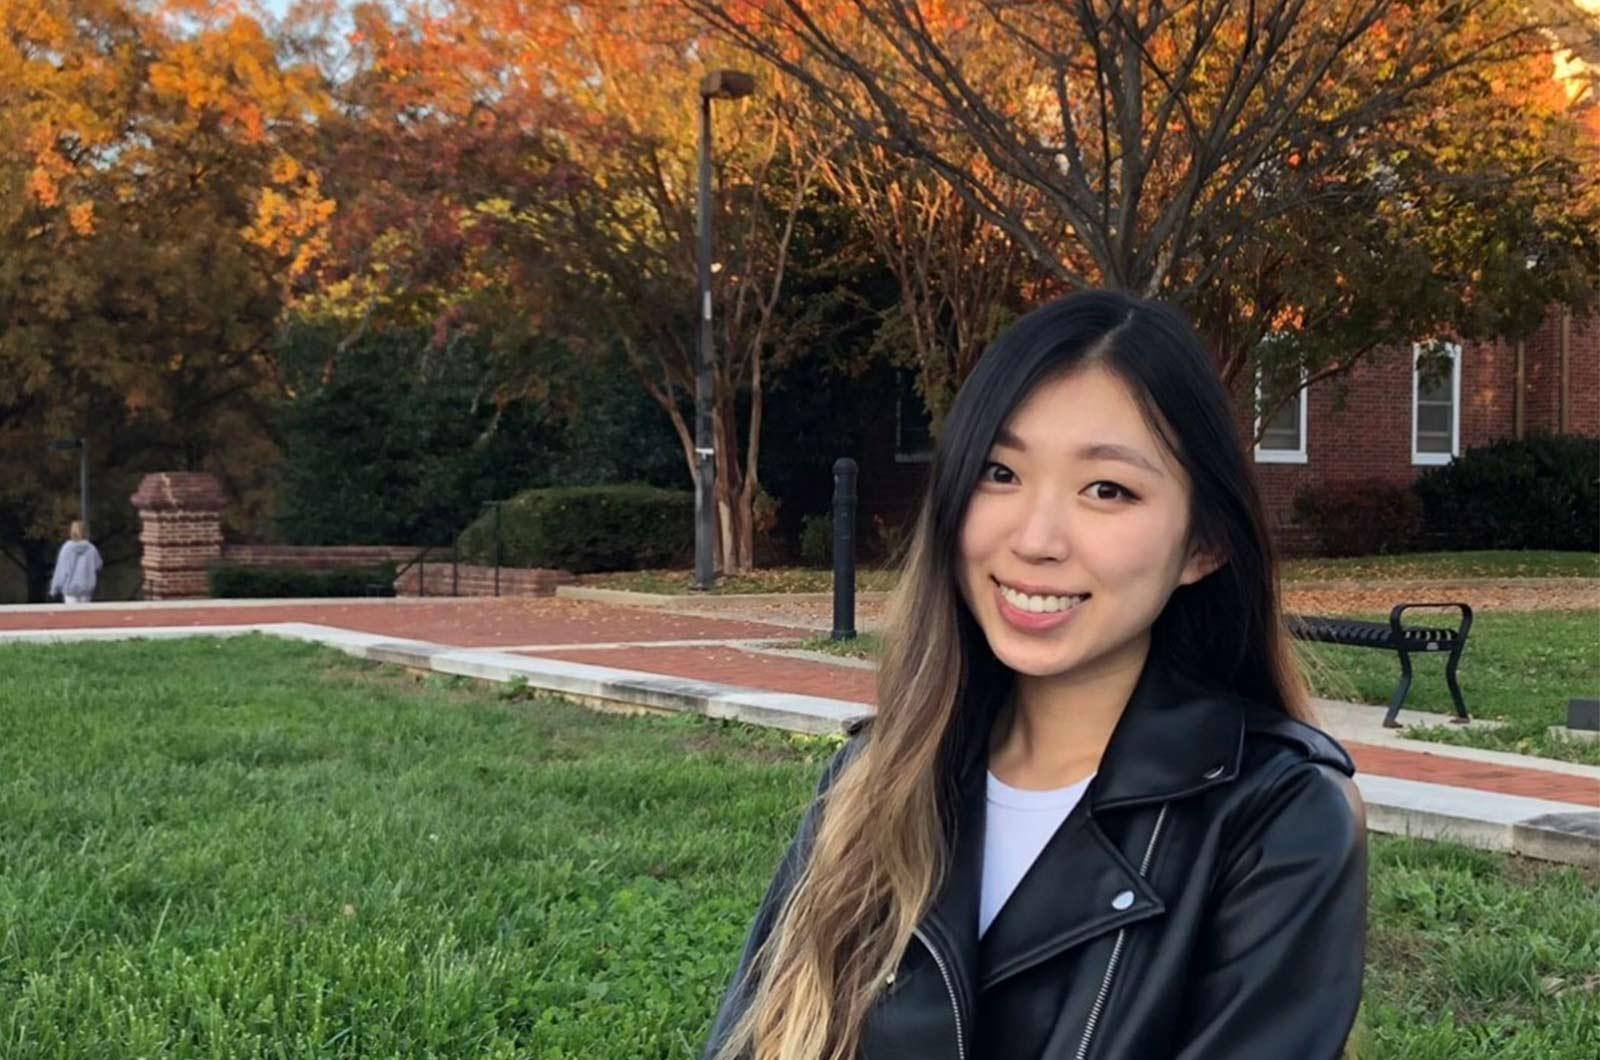 Student from the University of Maryland smiles at camera, posed in front of UMD building, trees with fall foliage